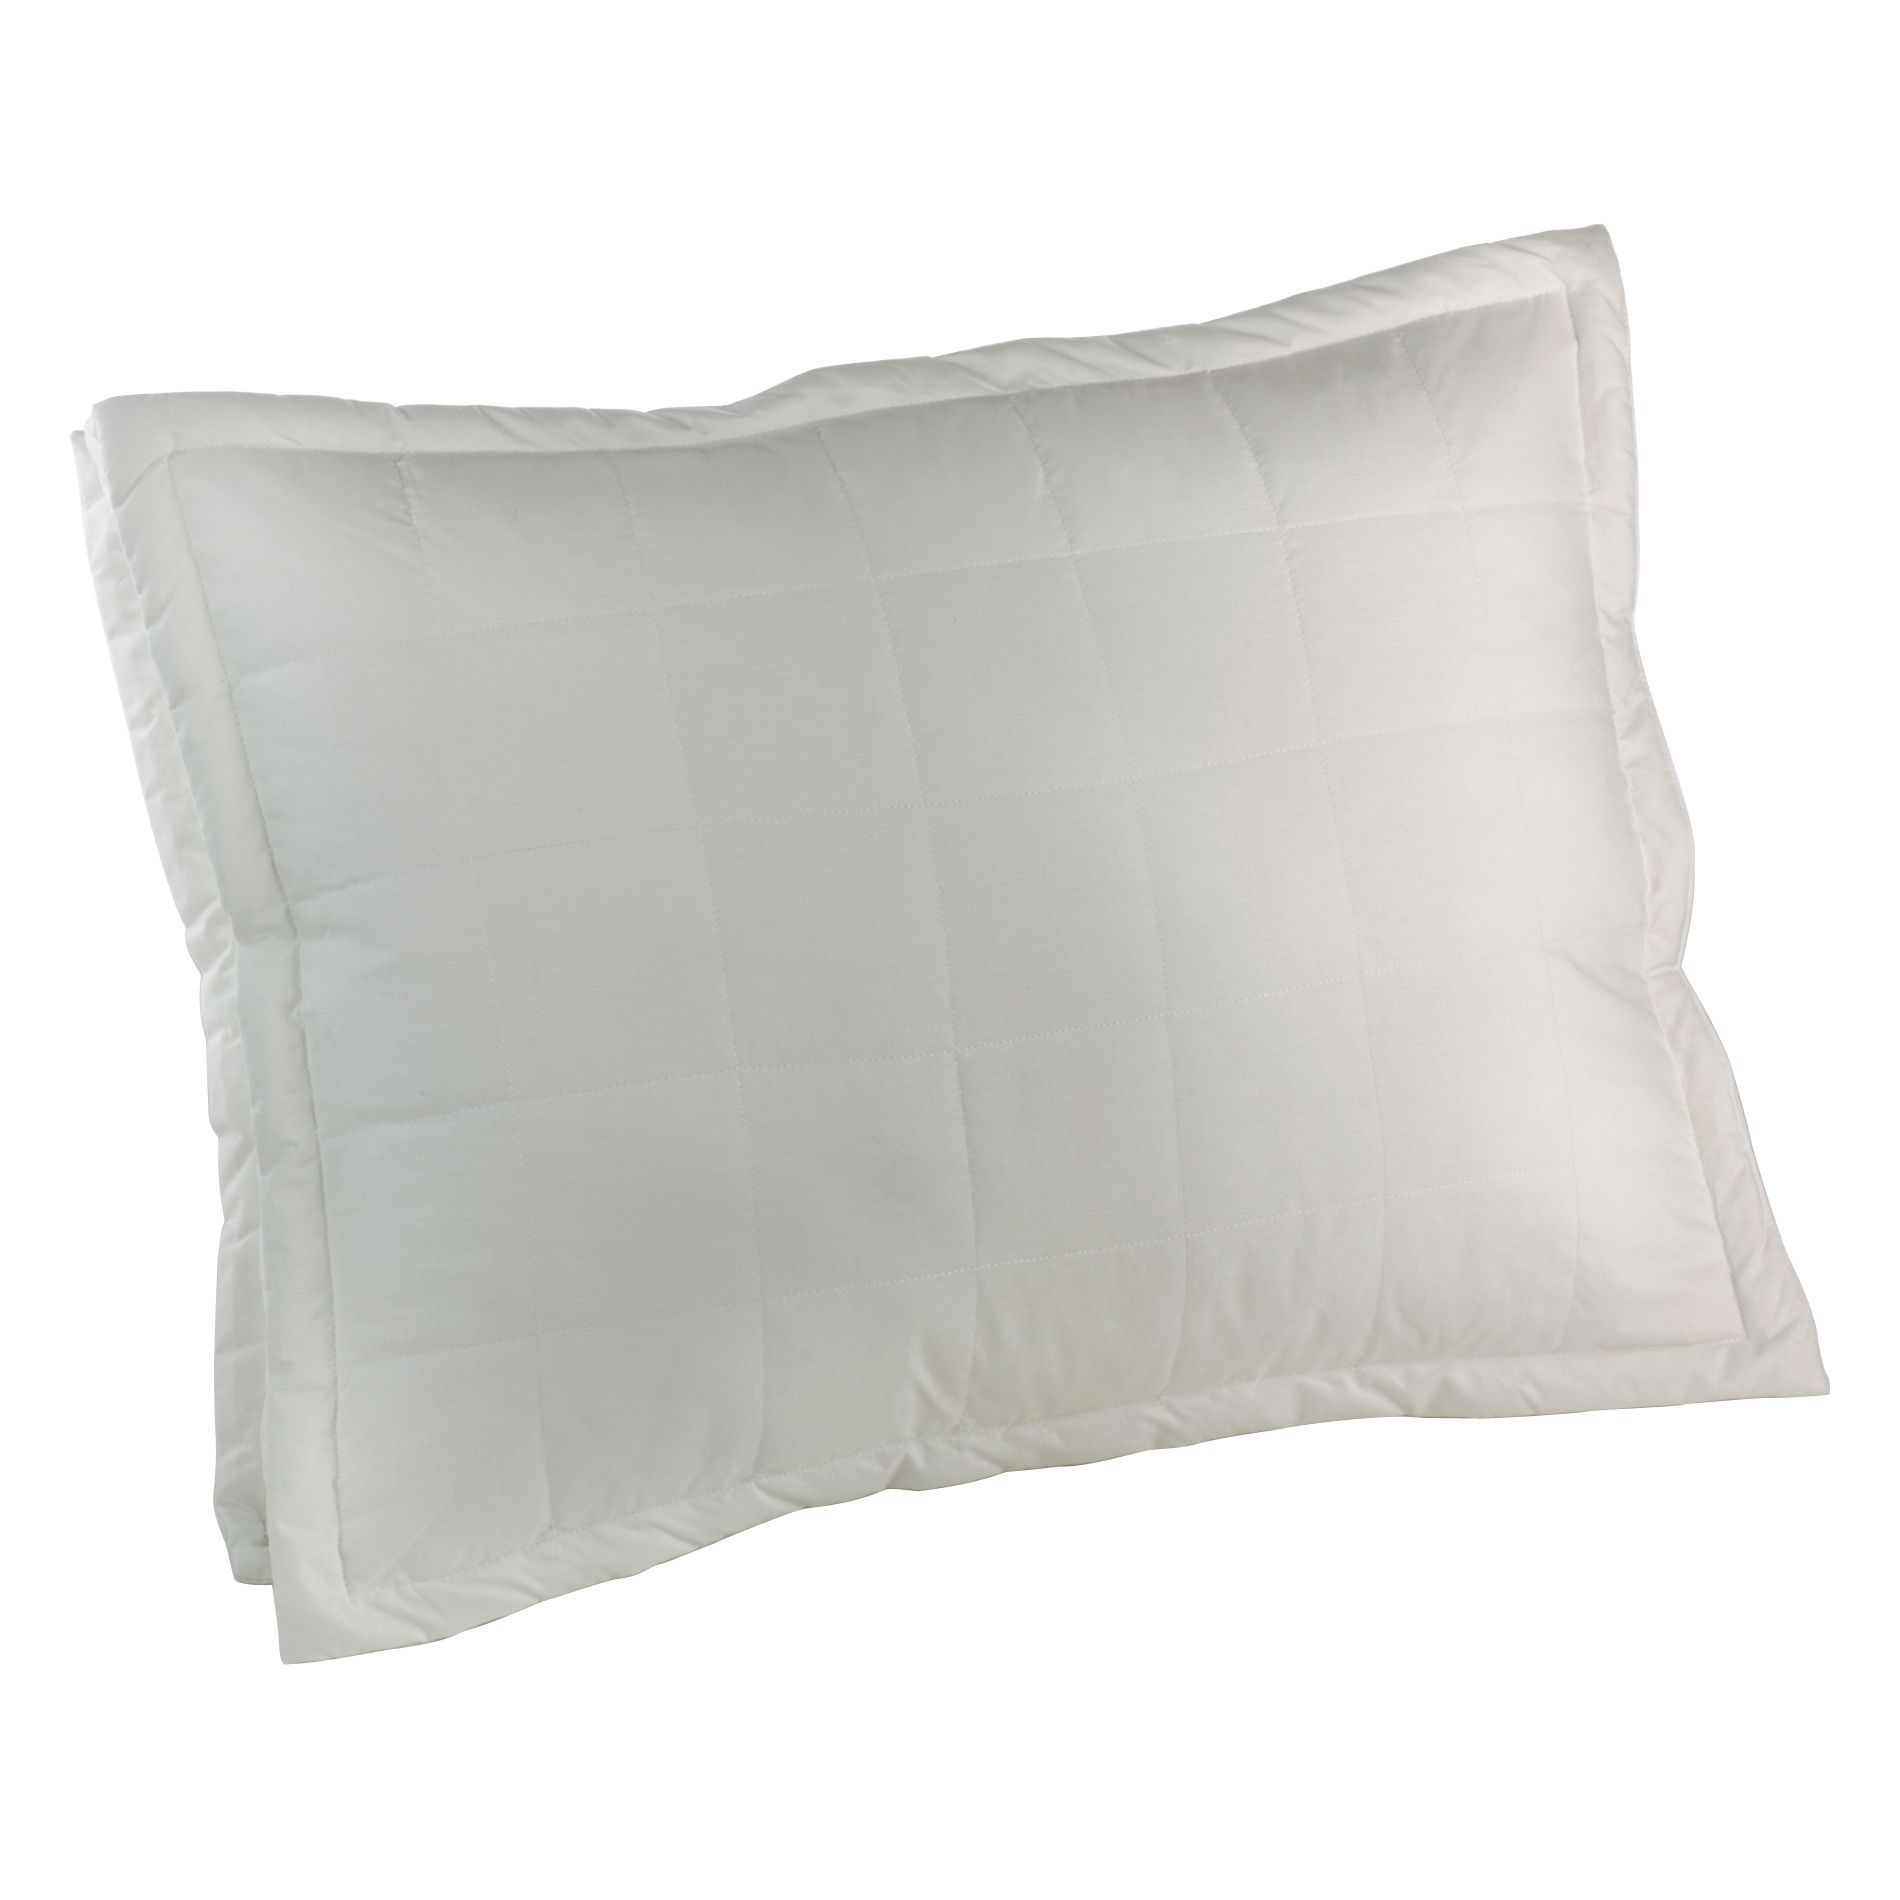 Double Support Feather Pillow